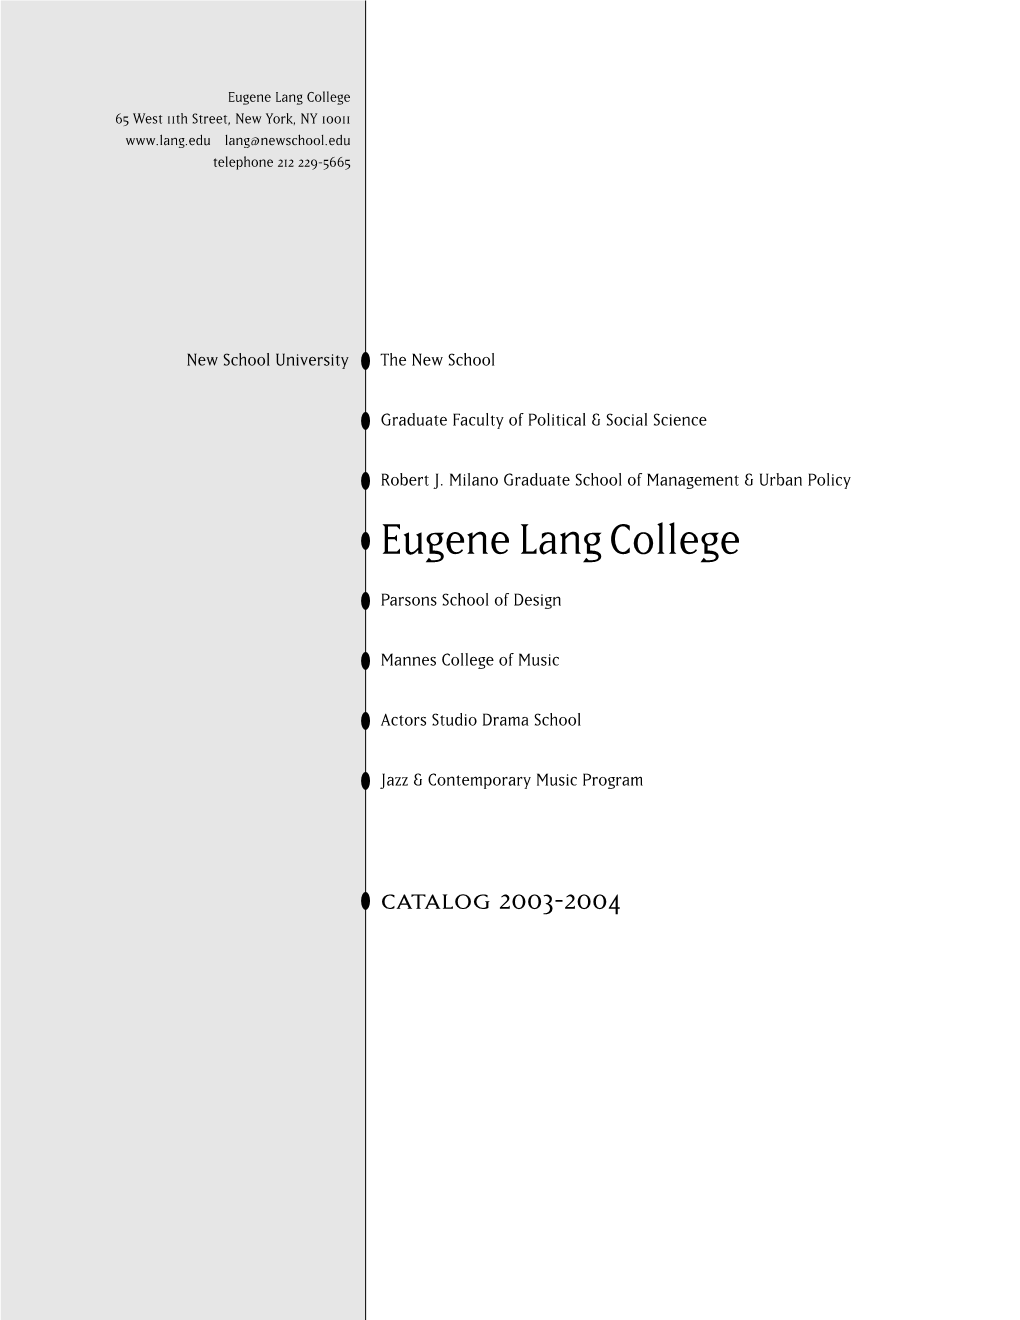 Eugene Lang College of Liberal Arts | the New School